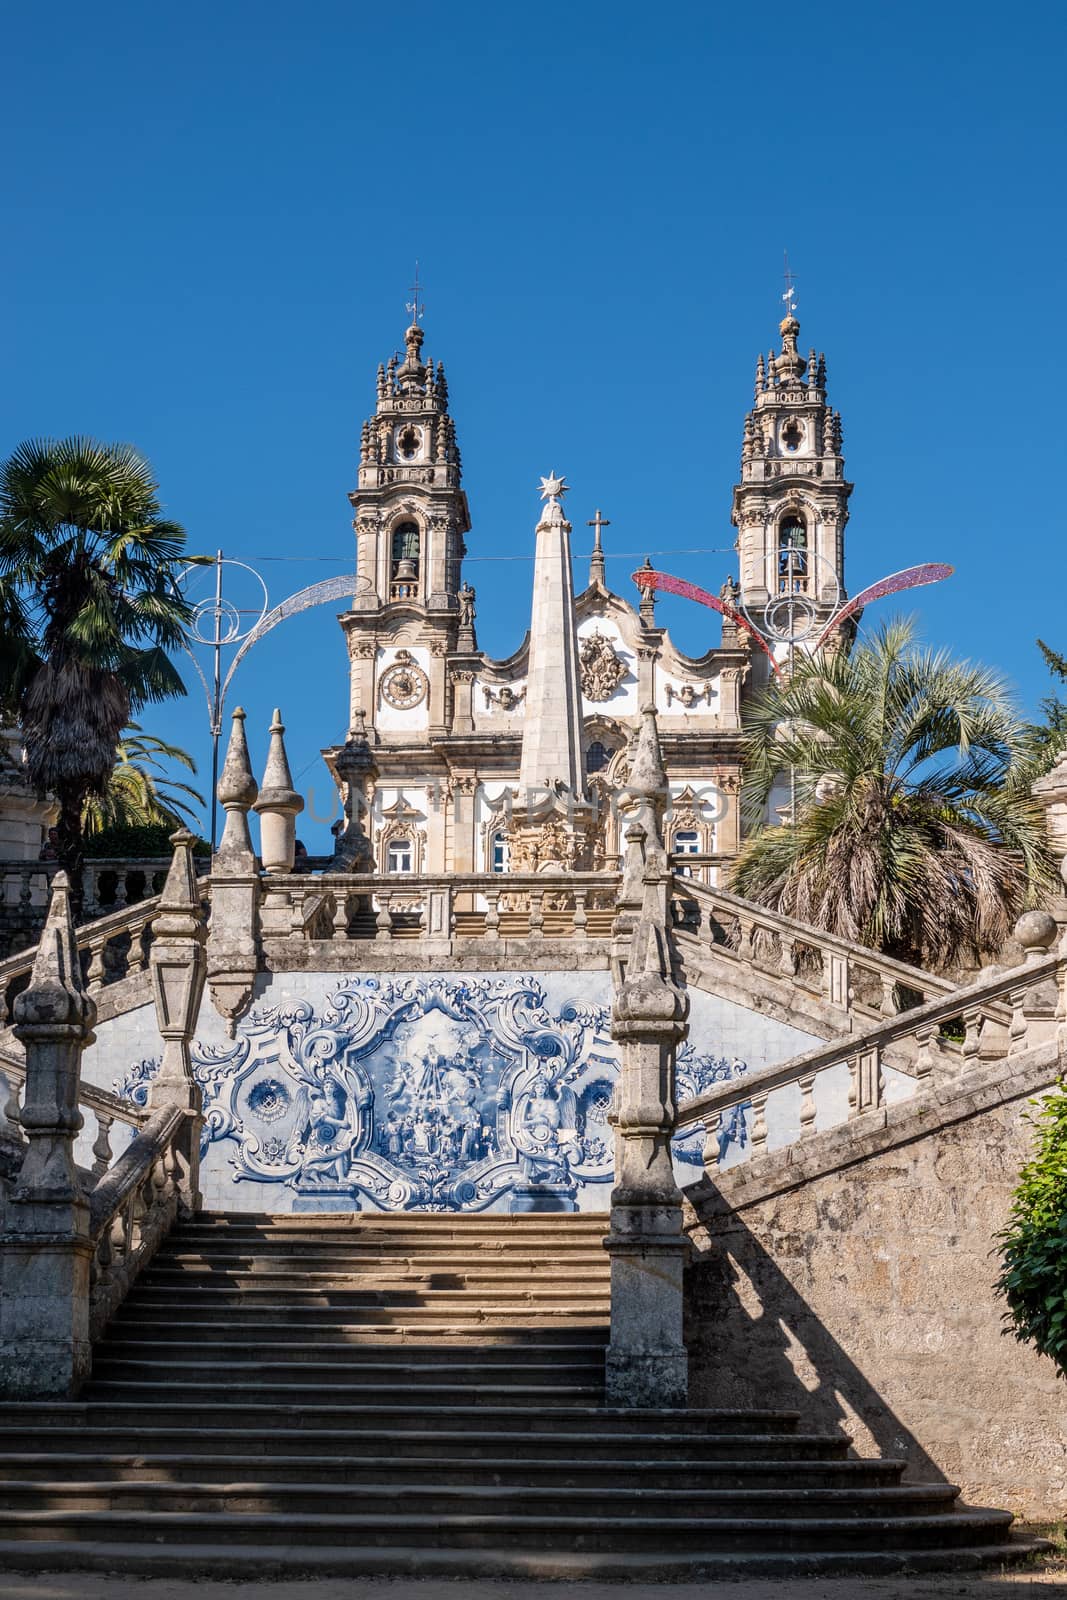 Multiple sets of stairs to Our Lady of Remedies church above the city of Lamego by steheap